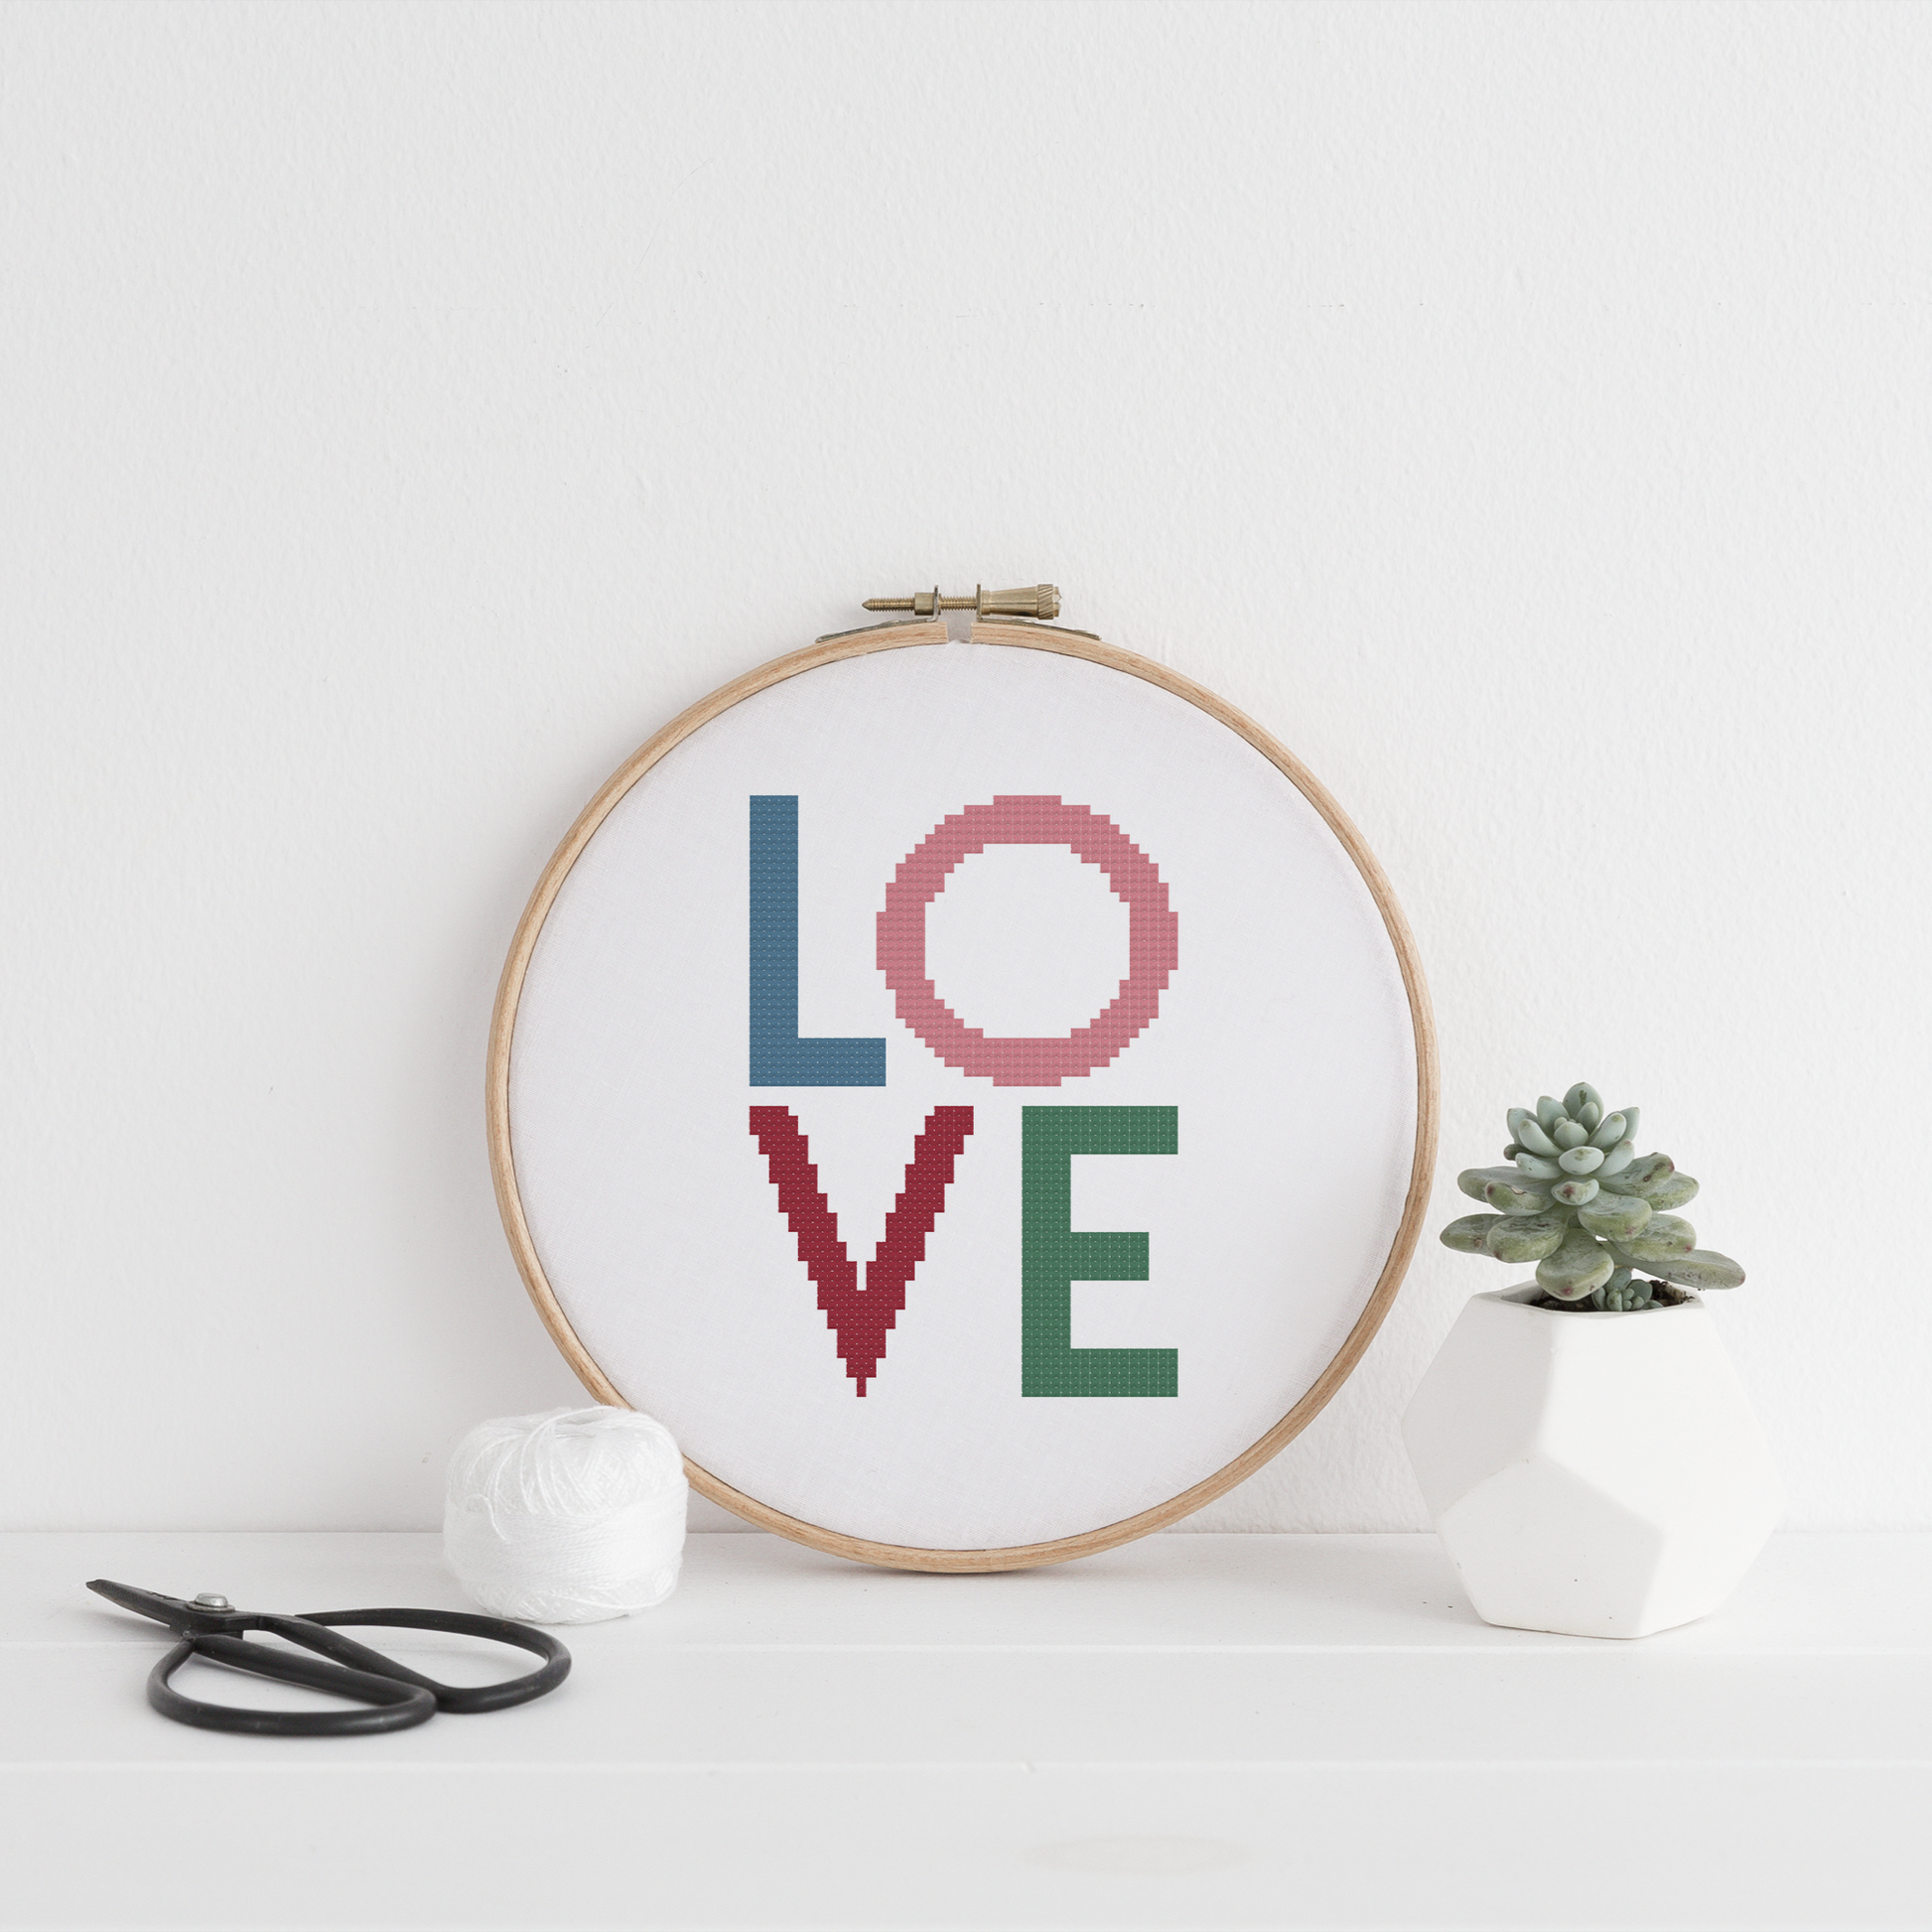 LOVE 1930's vintage style cross stitch pattern for digital download by F&B Crafts